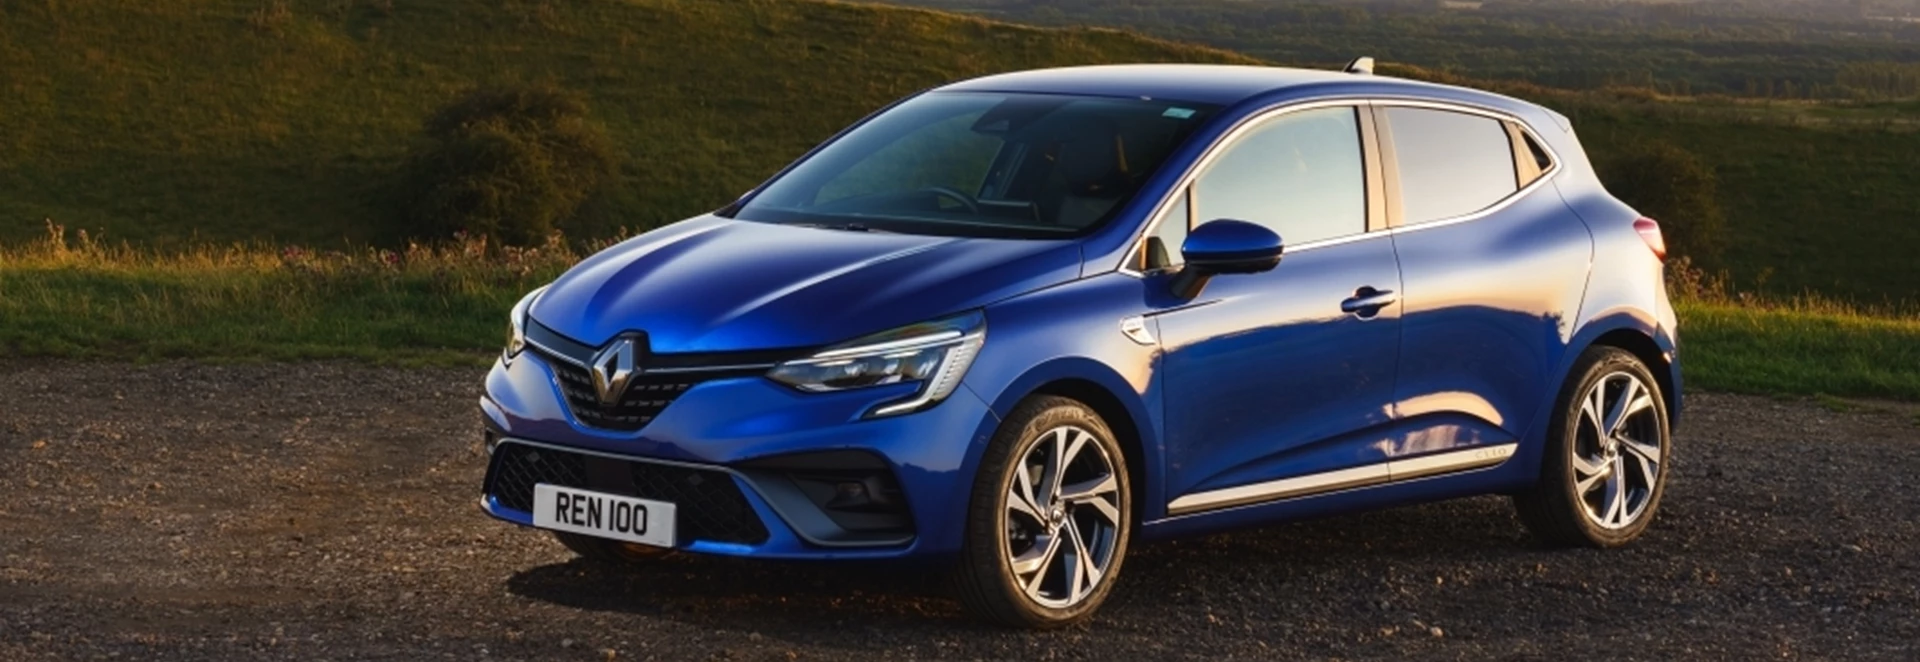 Renault Clio 2020 review